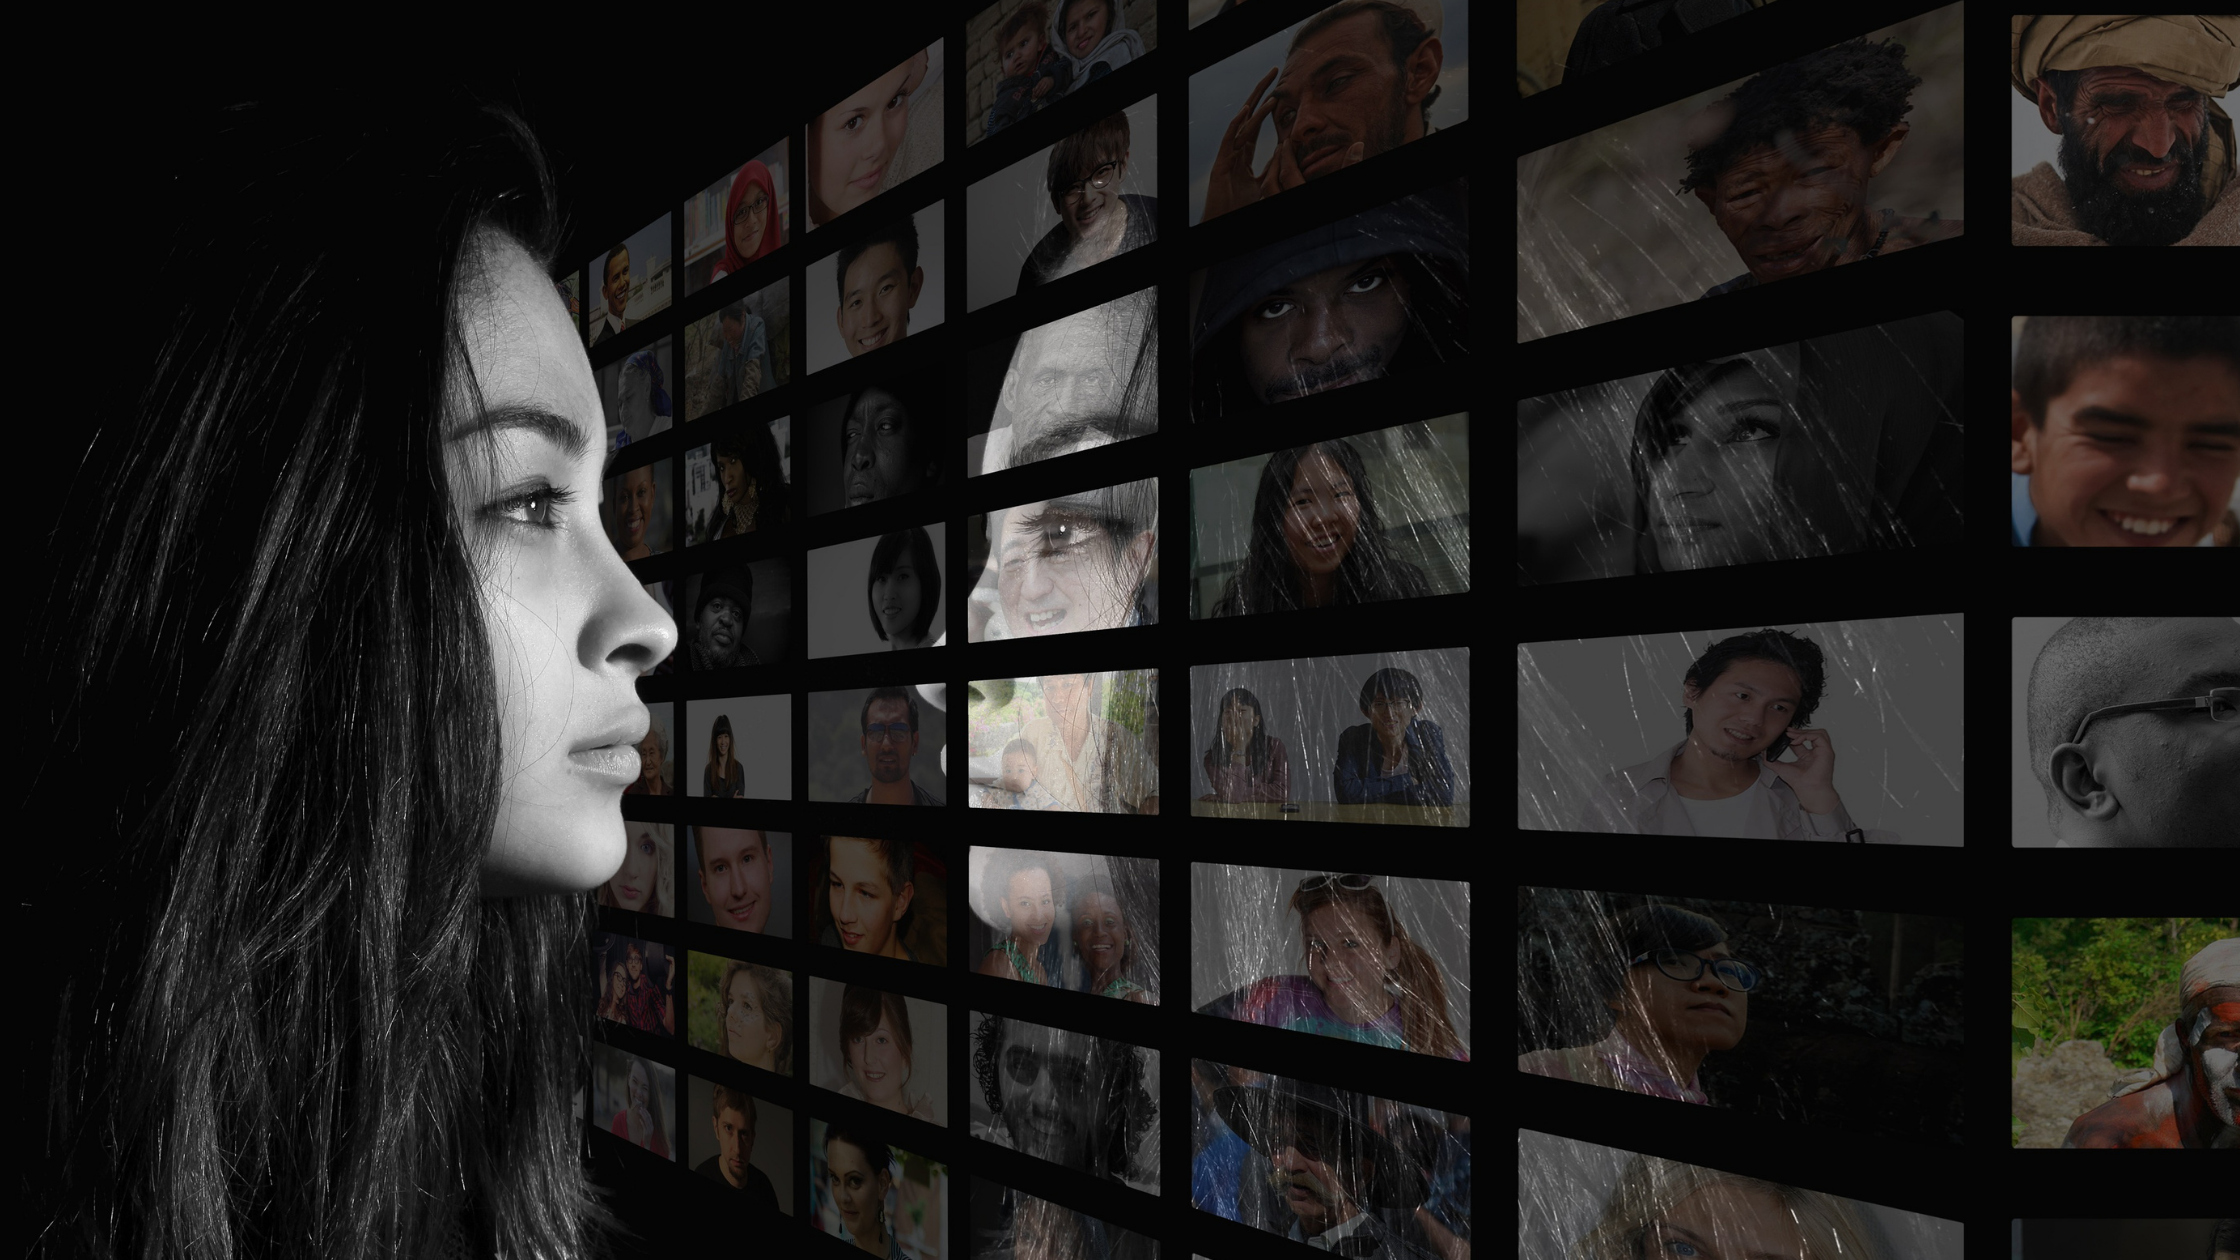 woman looking at screen with diverse representation of faces